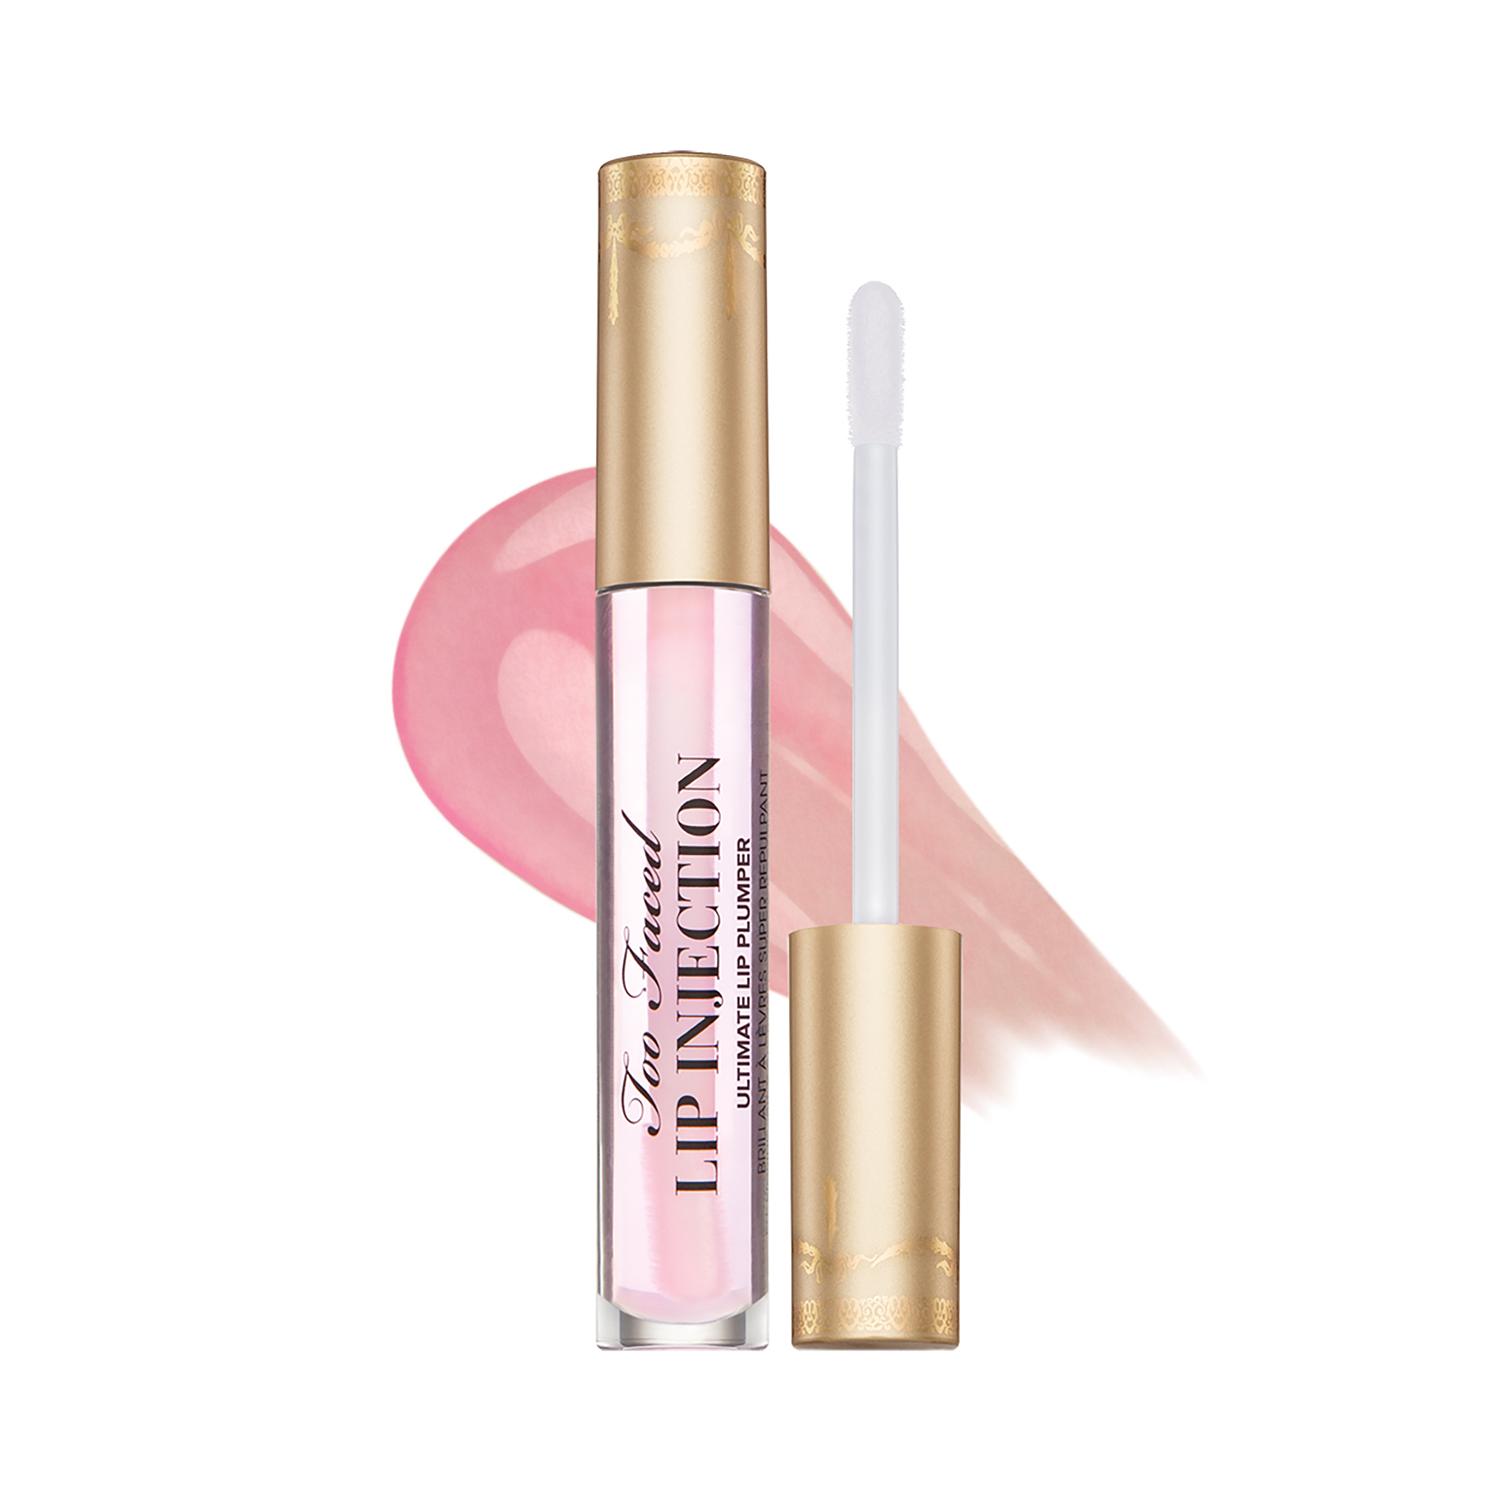 Too Faced | Too Faced Lip Injection Plumping Lip Gloss -  Clear (4g)